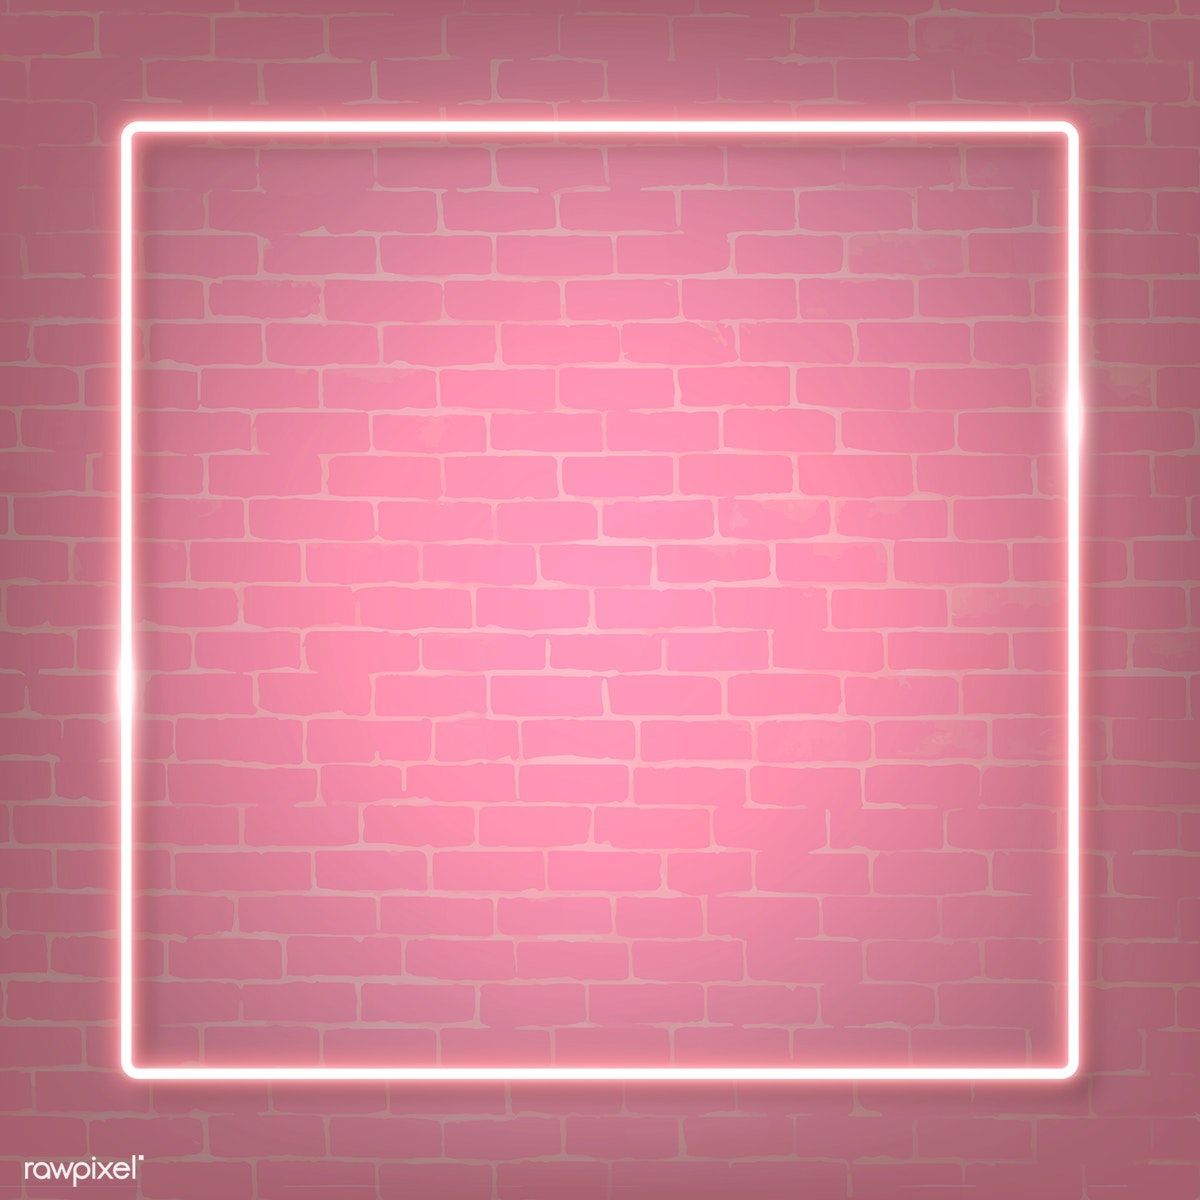 Download premium vector of Square pink neon frame on a pink brick wall. Pink neon sign, Neon wallpaper, Instagram frame